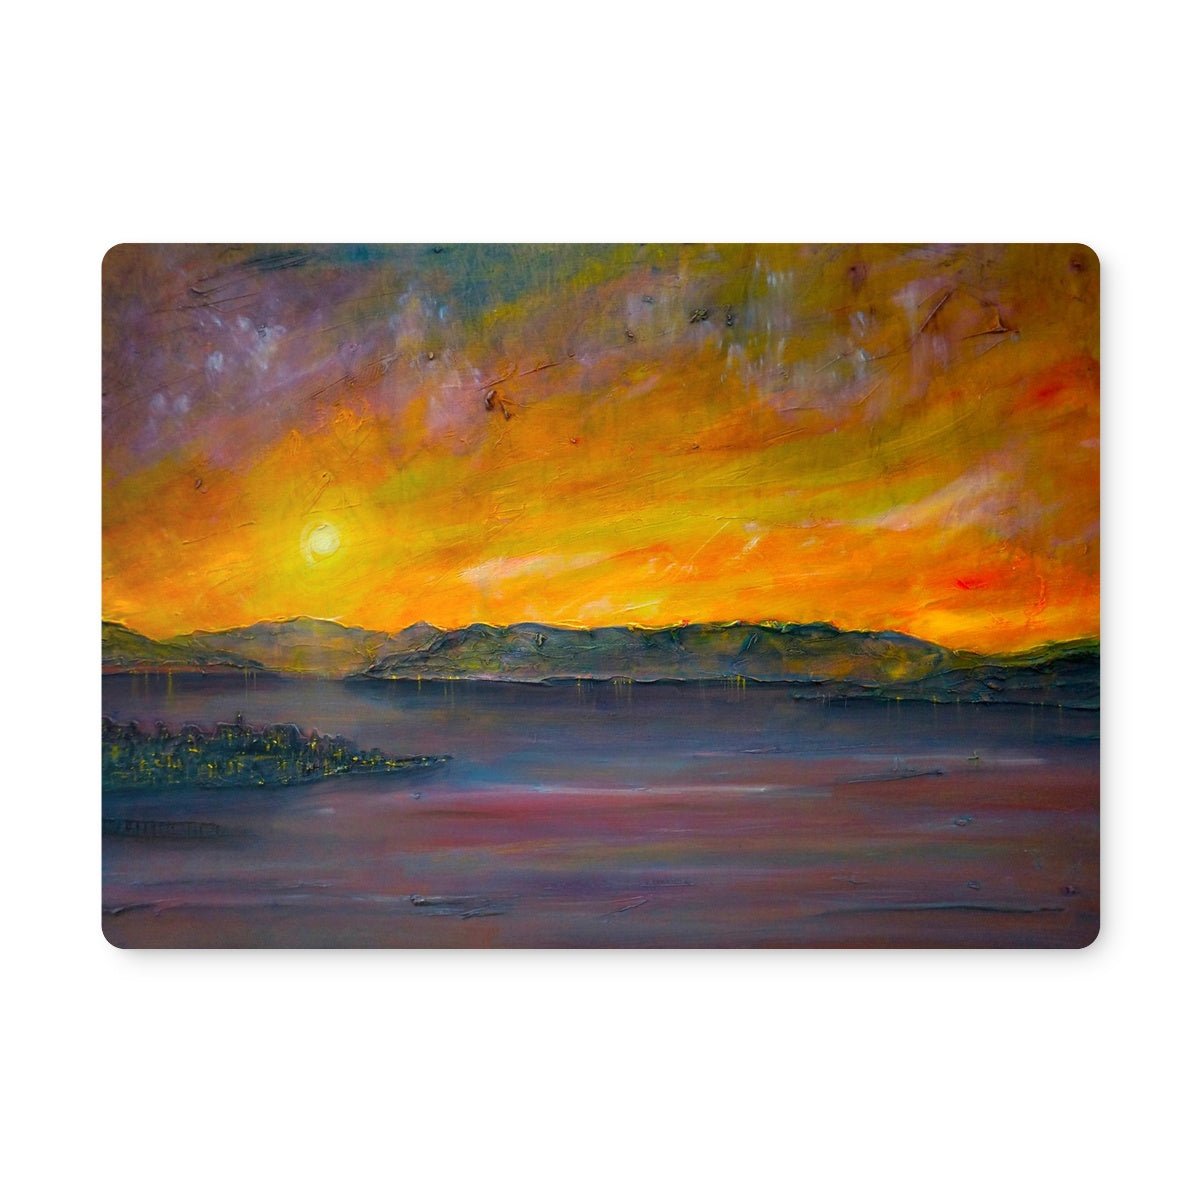 Sunset Over Gourock Art Gifts Placemat-Placemats-River Clyde Art Gallery-4 Placemats-Paintings, Prints, Homeware, Art Gifts From Scotland By Scottish Artist Kevin Hunter